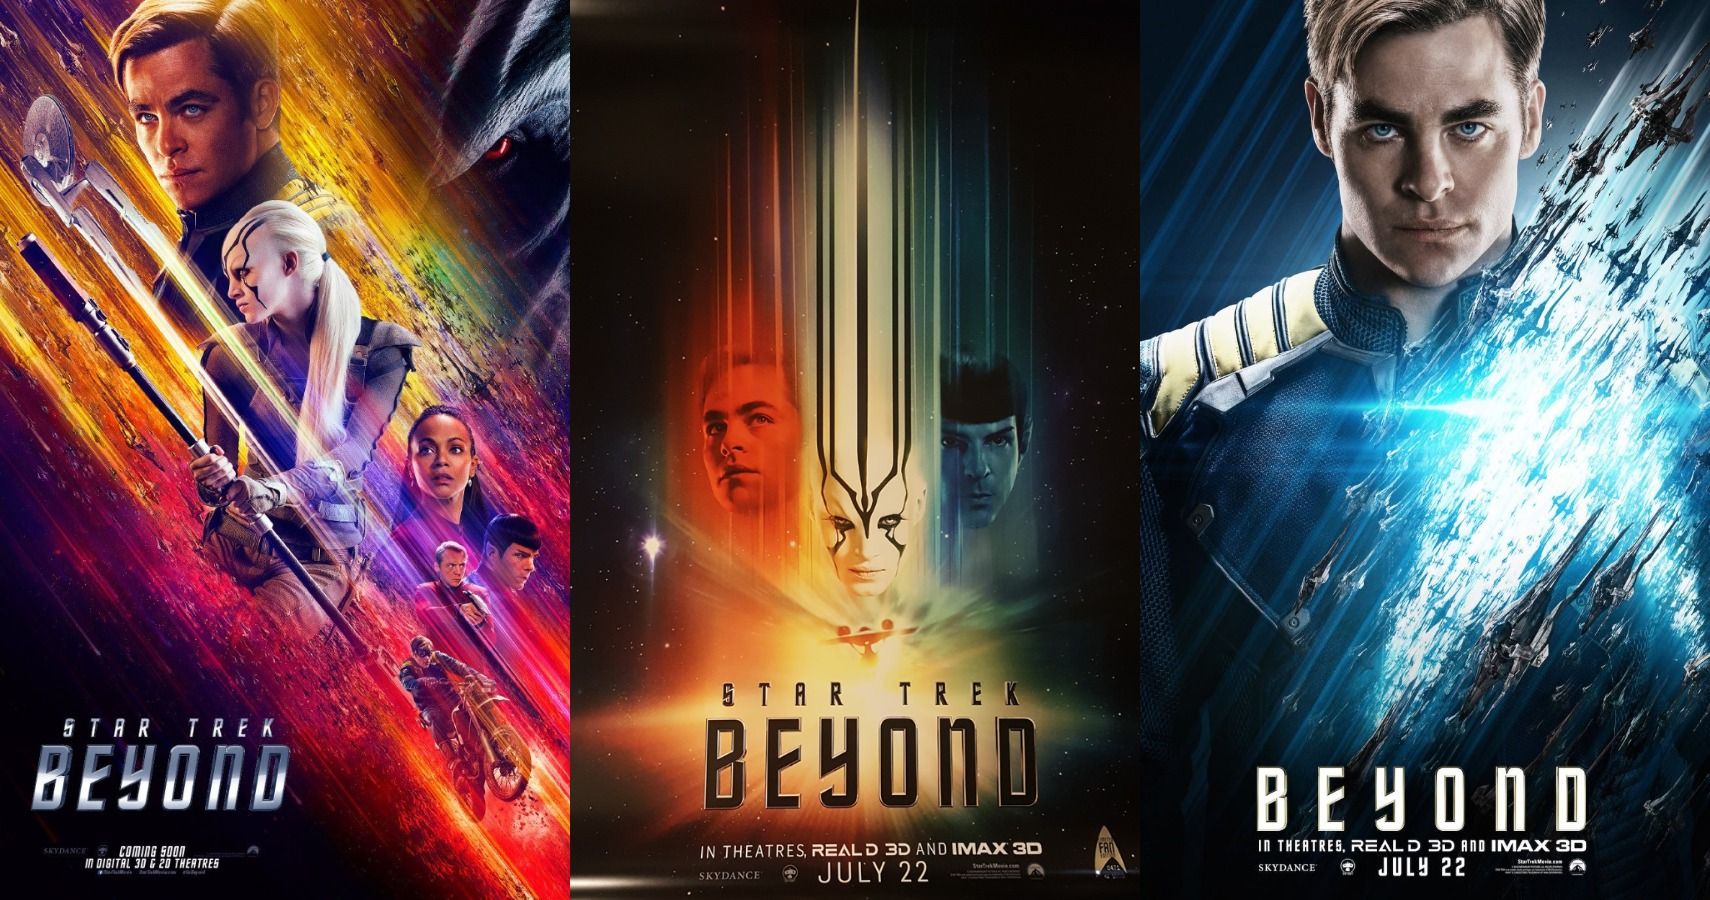 Three posters for Star Trek Beyond that are a good indicator for what audiences can expect.